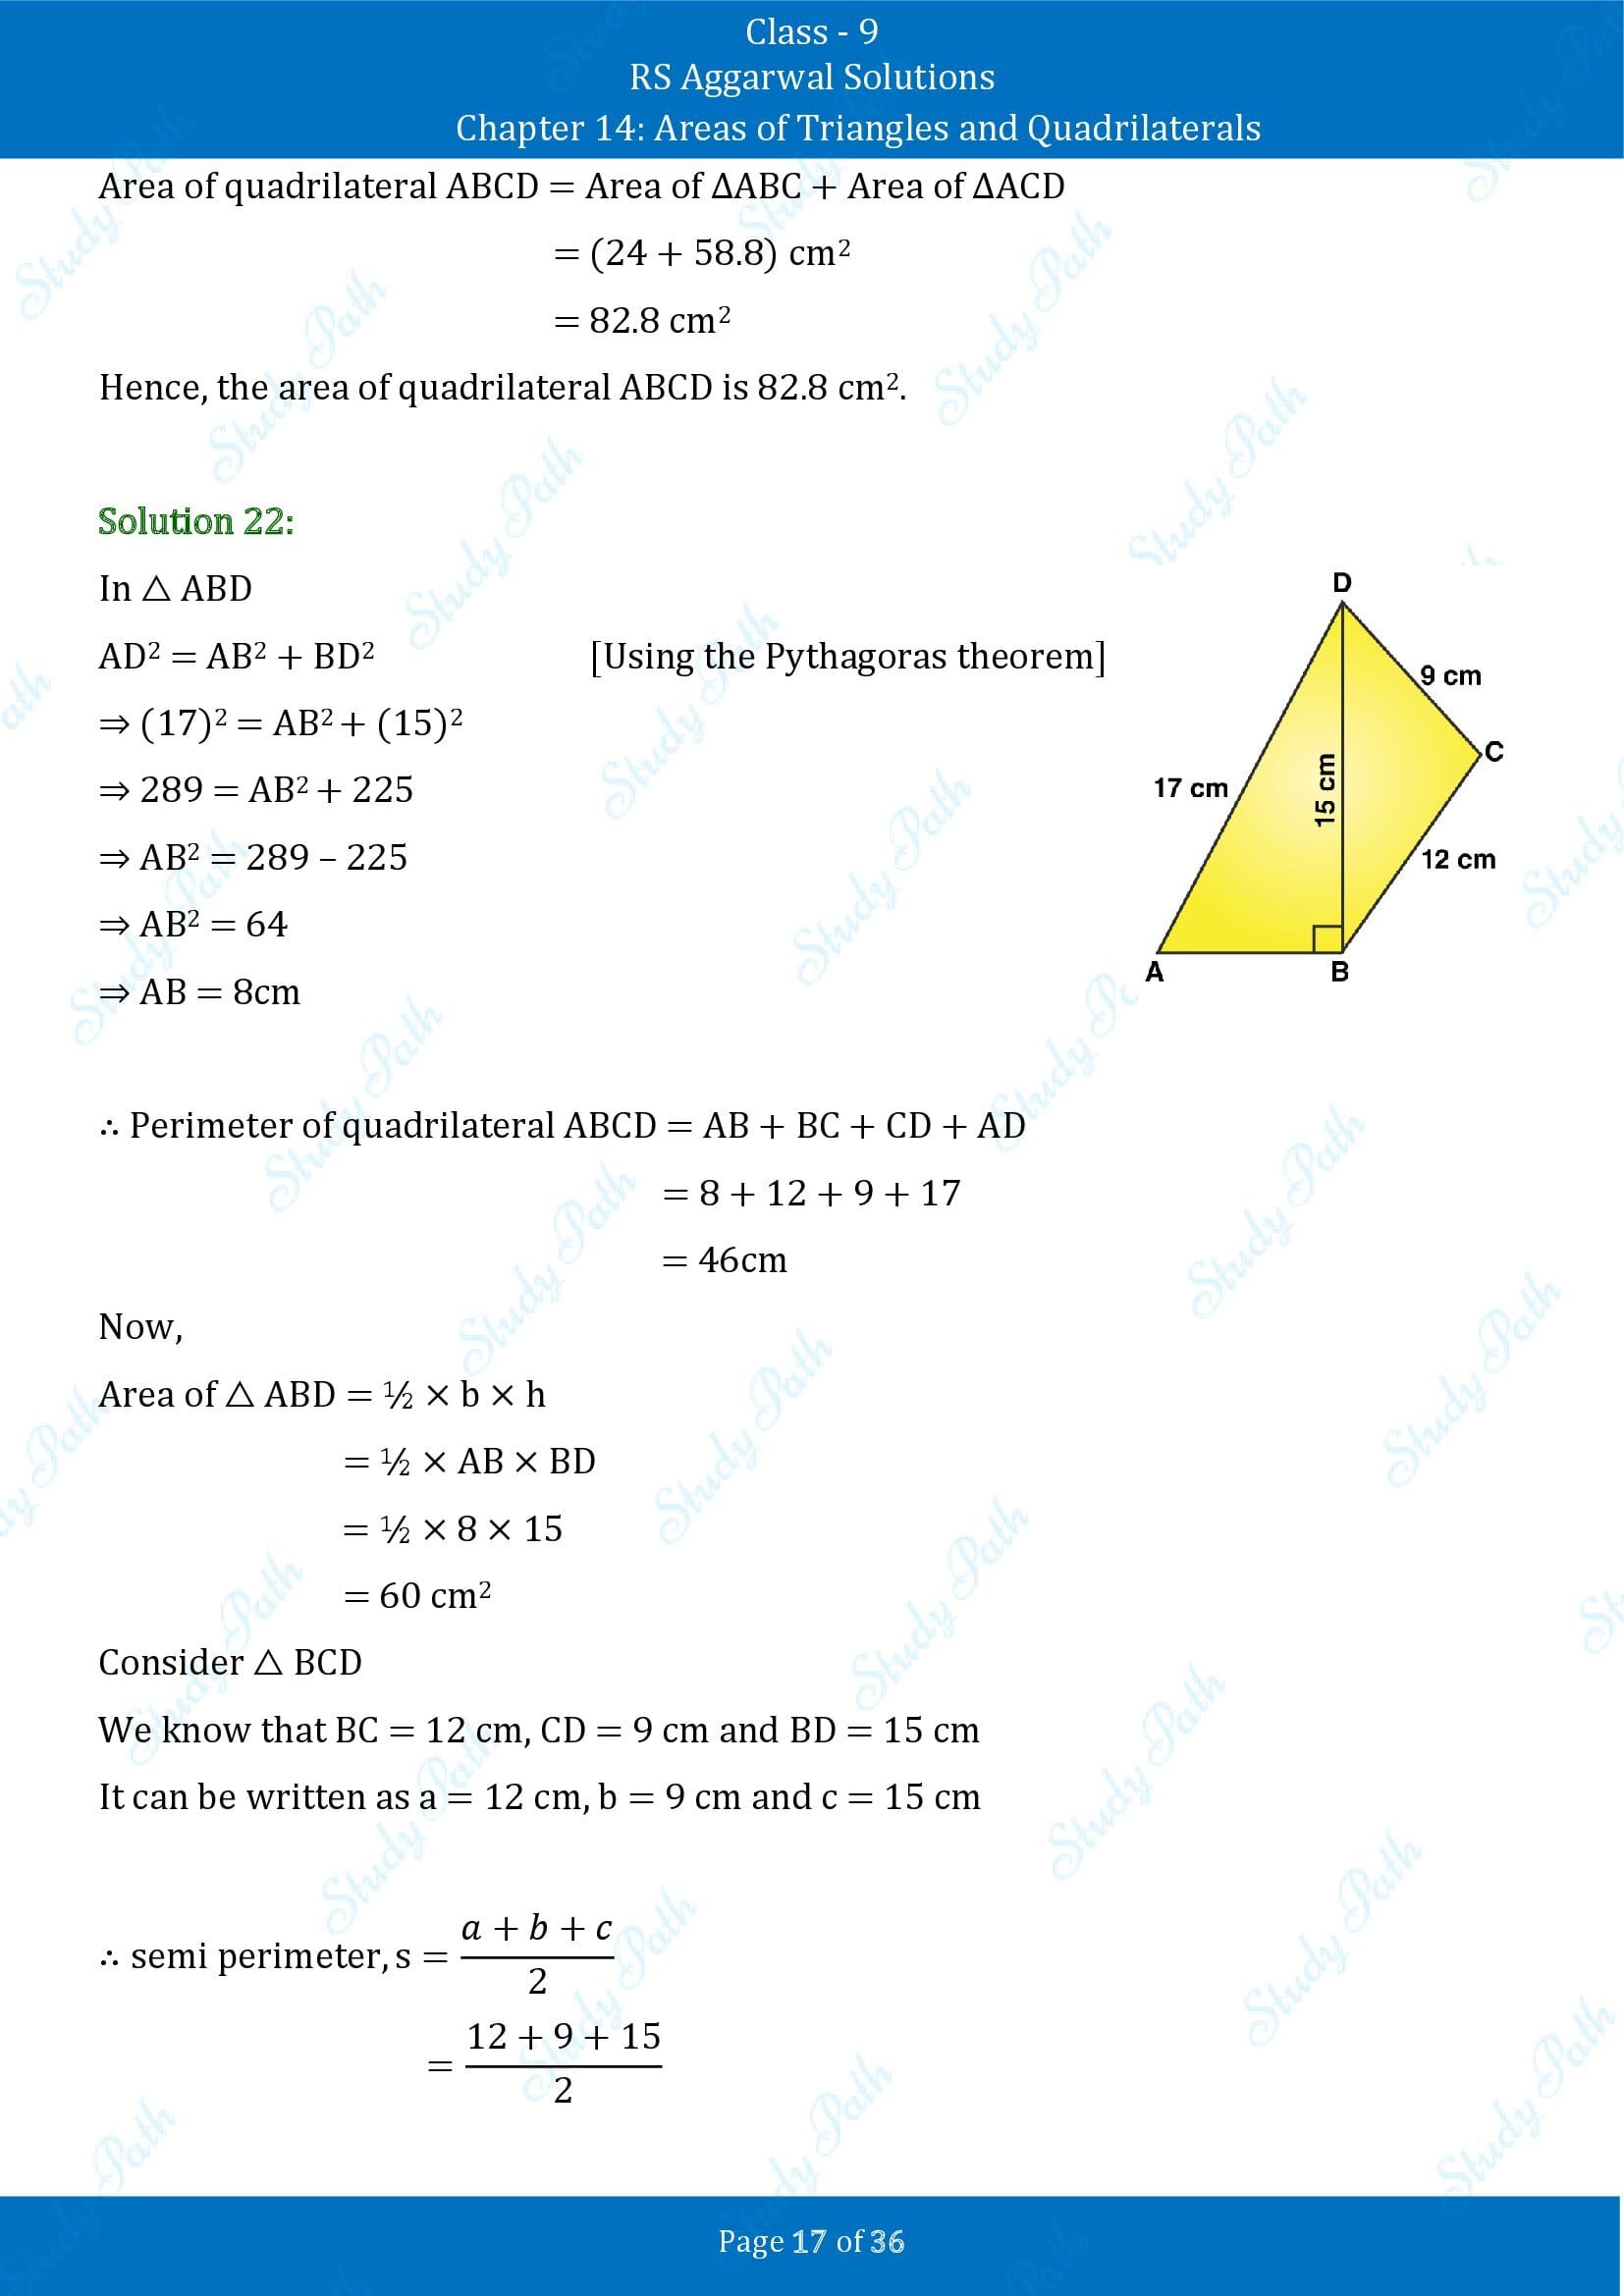 RS Aggarwal Solutions Class 9 Chapter 14 Areas of Triangles and Quadrilaterals Exercise 14 00017